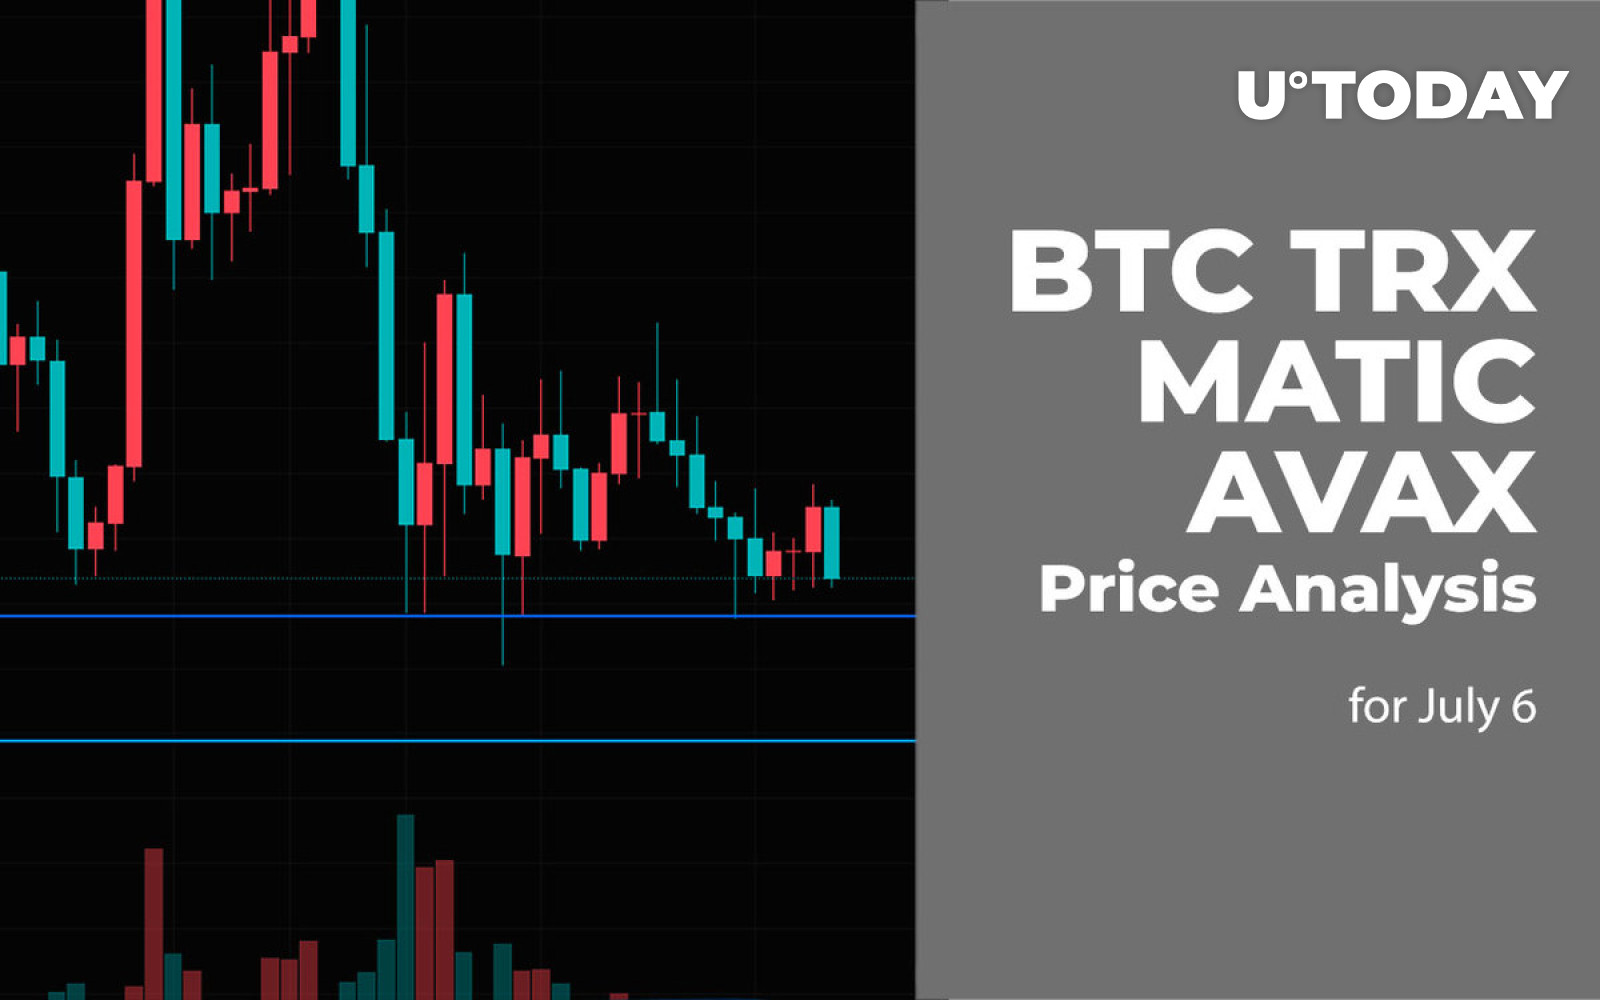 BTC, TRX, MATIC and AVAX Price Analysis for July 6